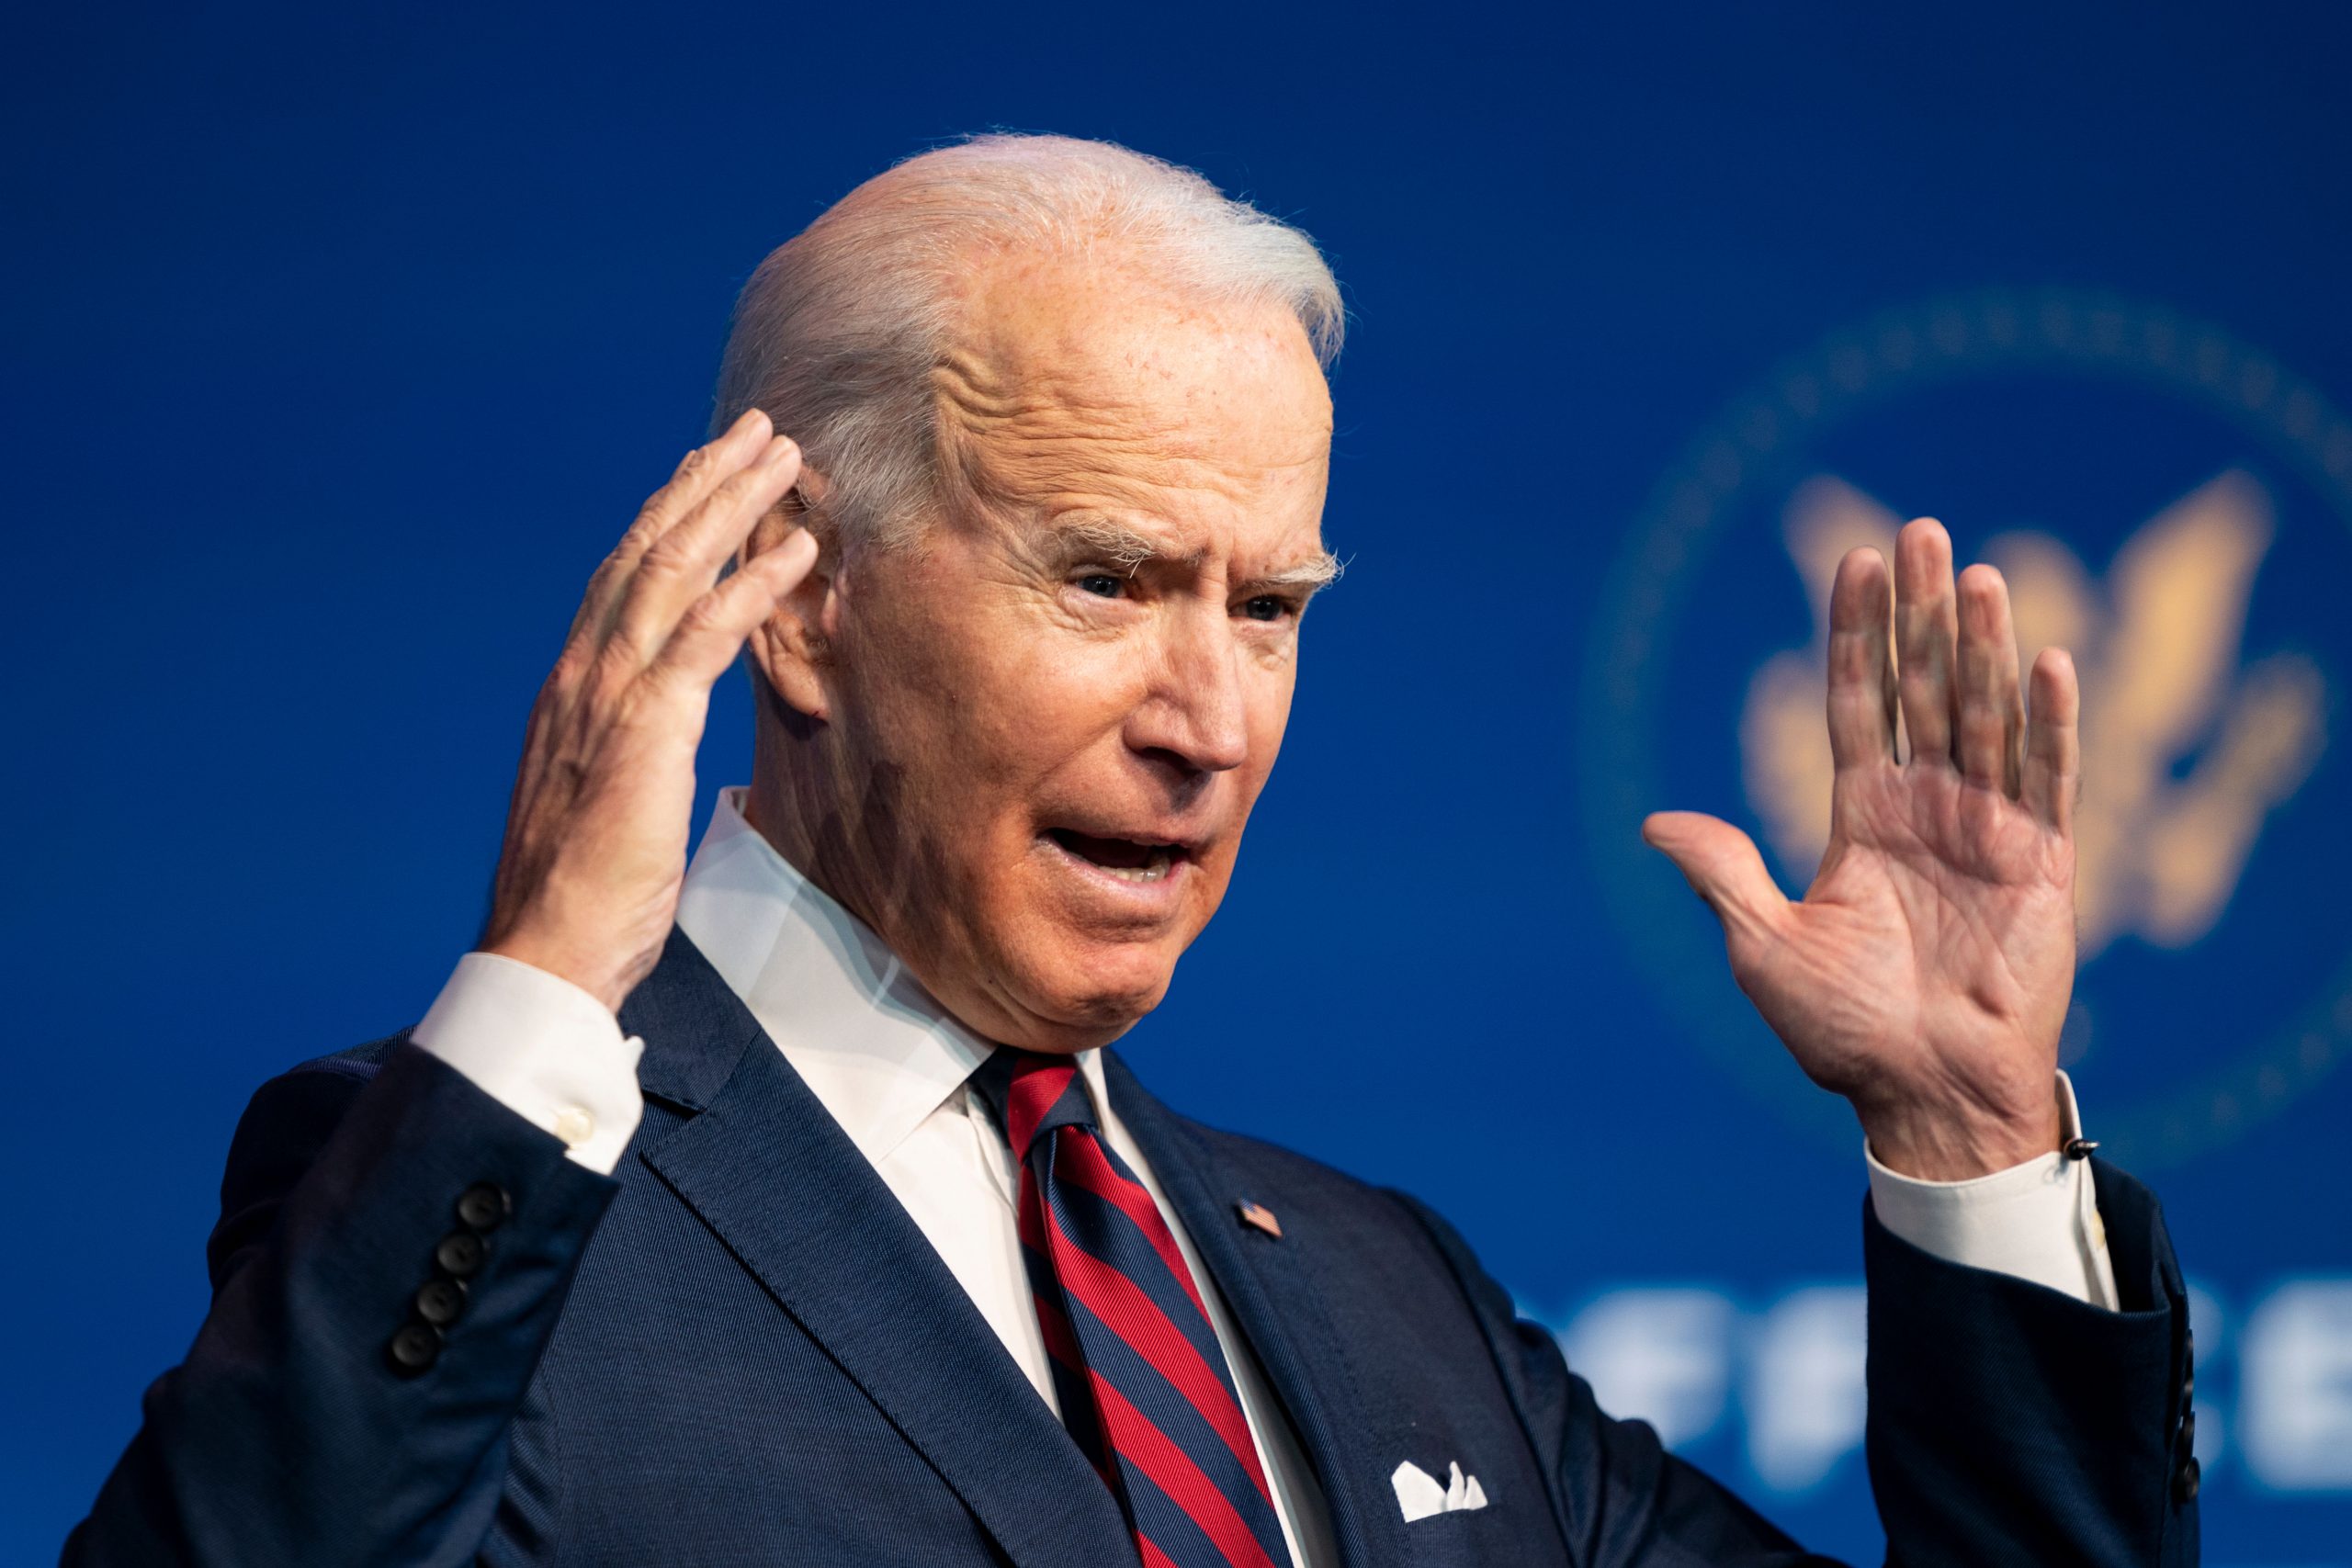 Bipartisanship on the COVID-19 package is Biden’s first call: Reports